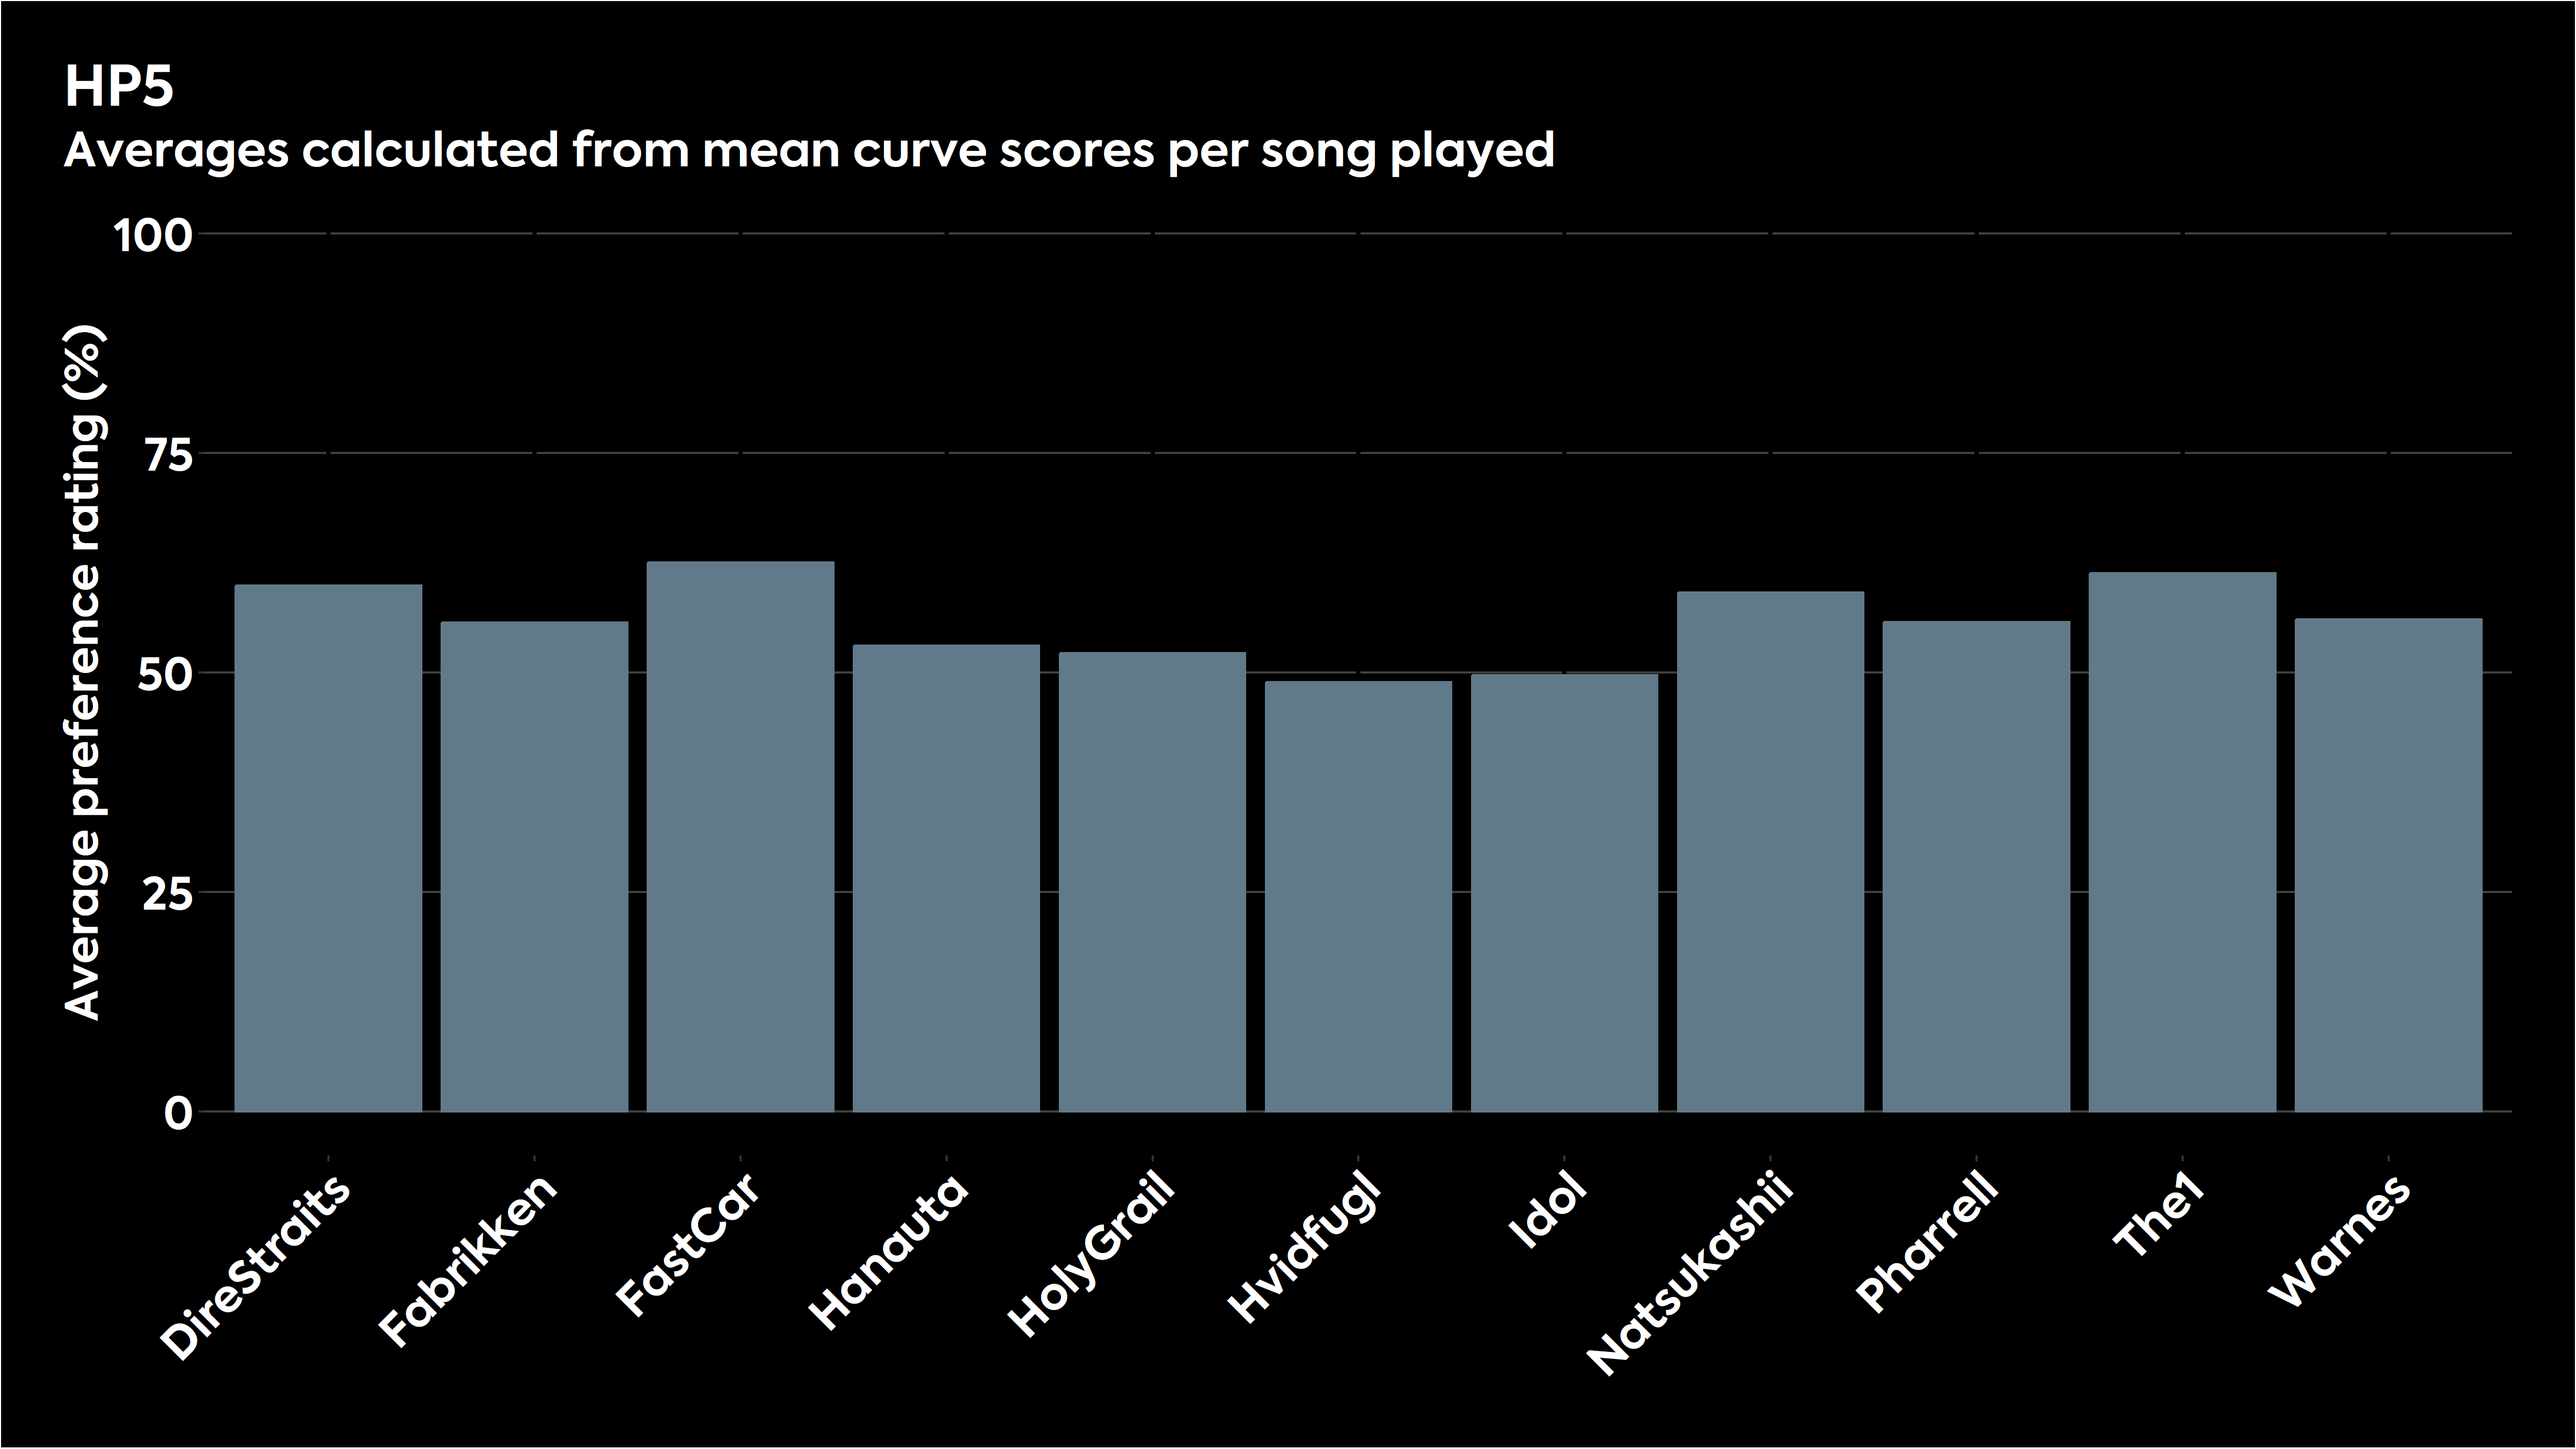 Bar chart showing how the various stimuli were judged for HP5 in listening tests.